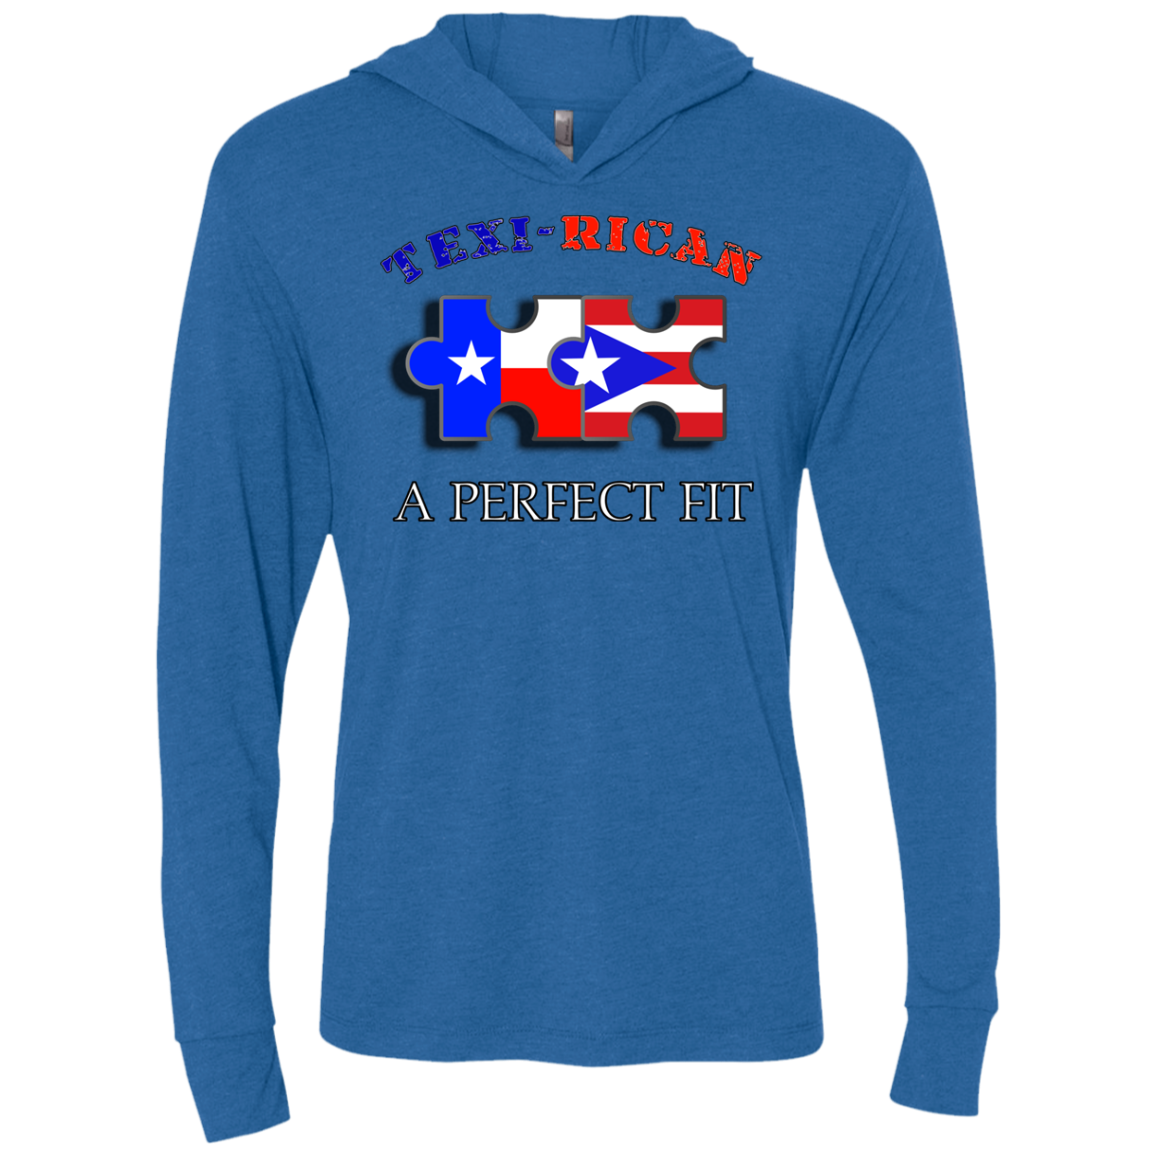 Texi-Rican Perfect Fit Unisex Triblend LS Hooded T-Shirt